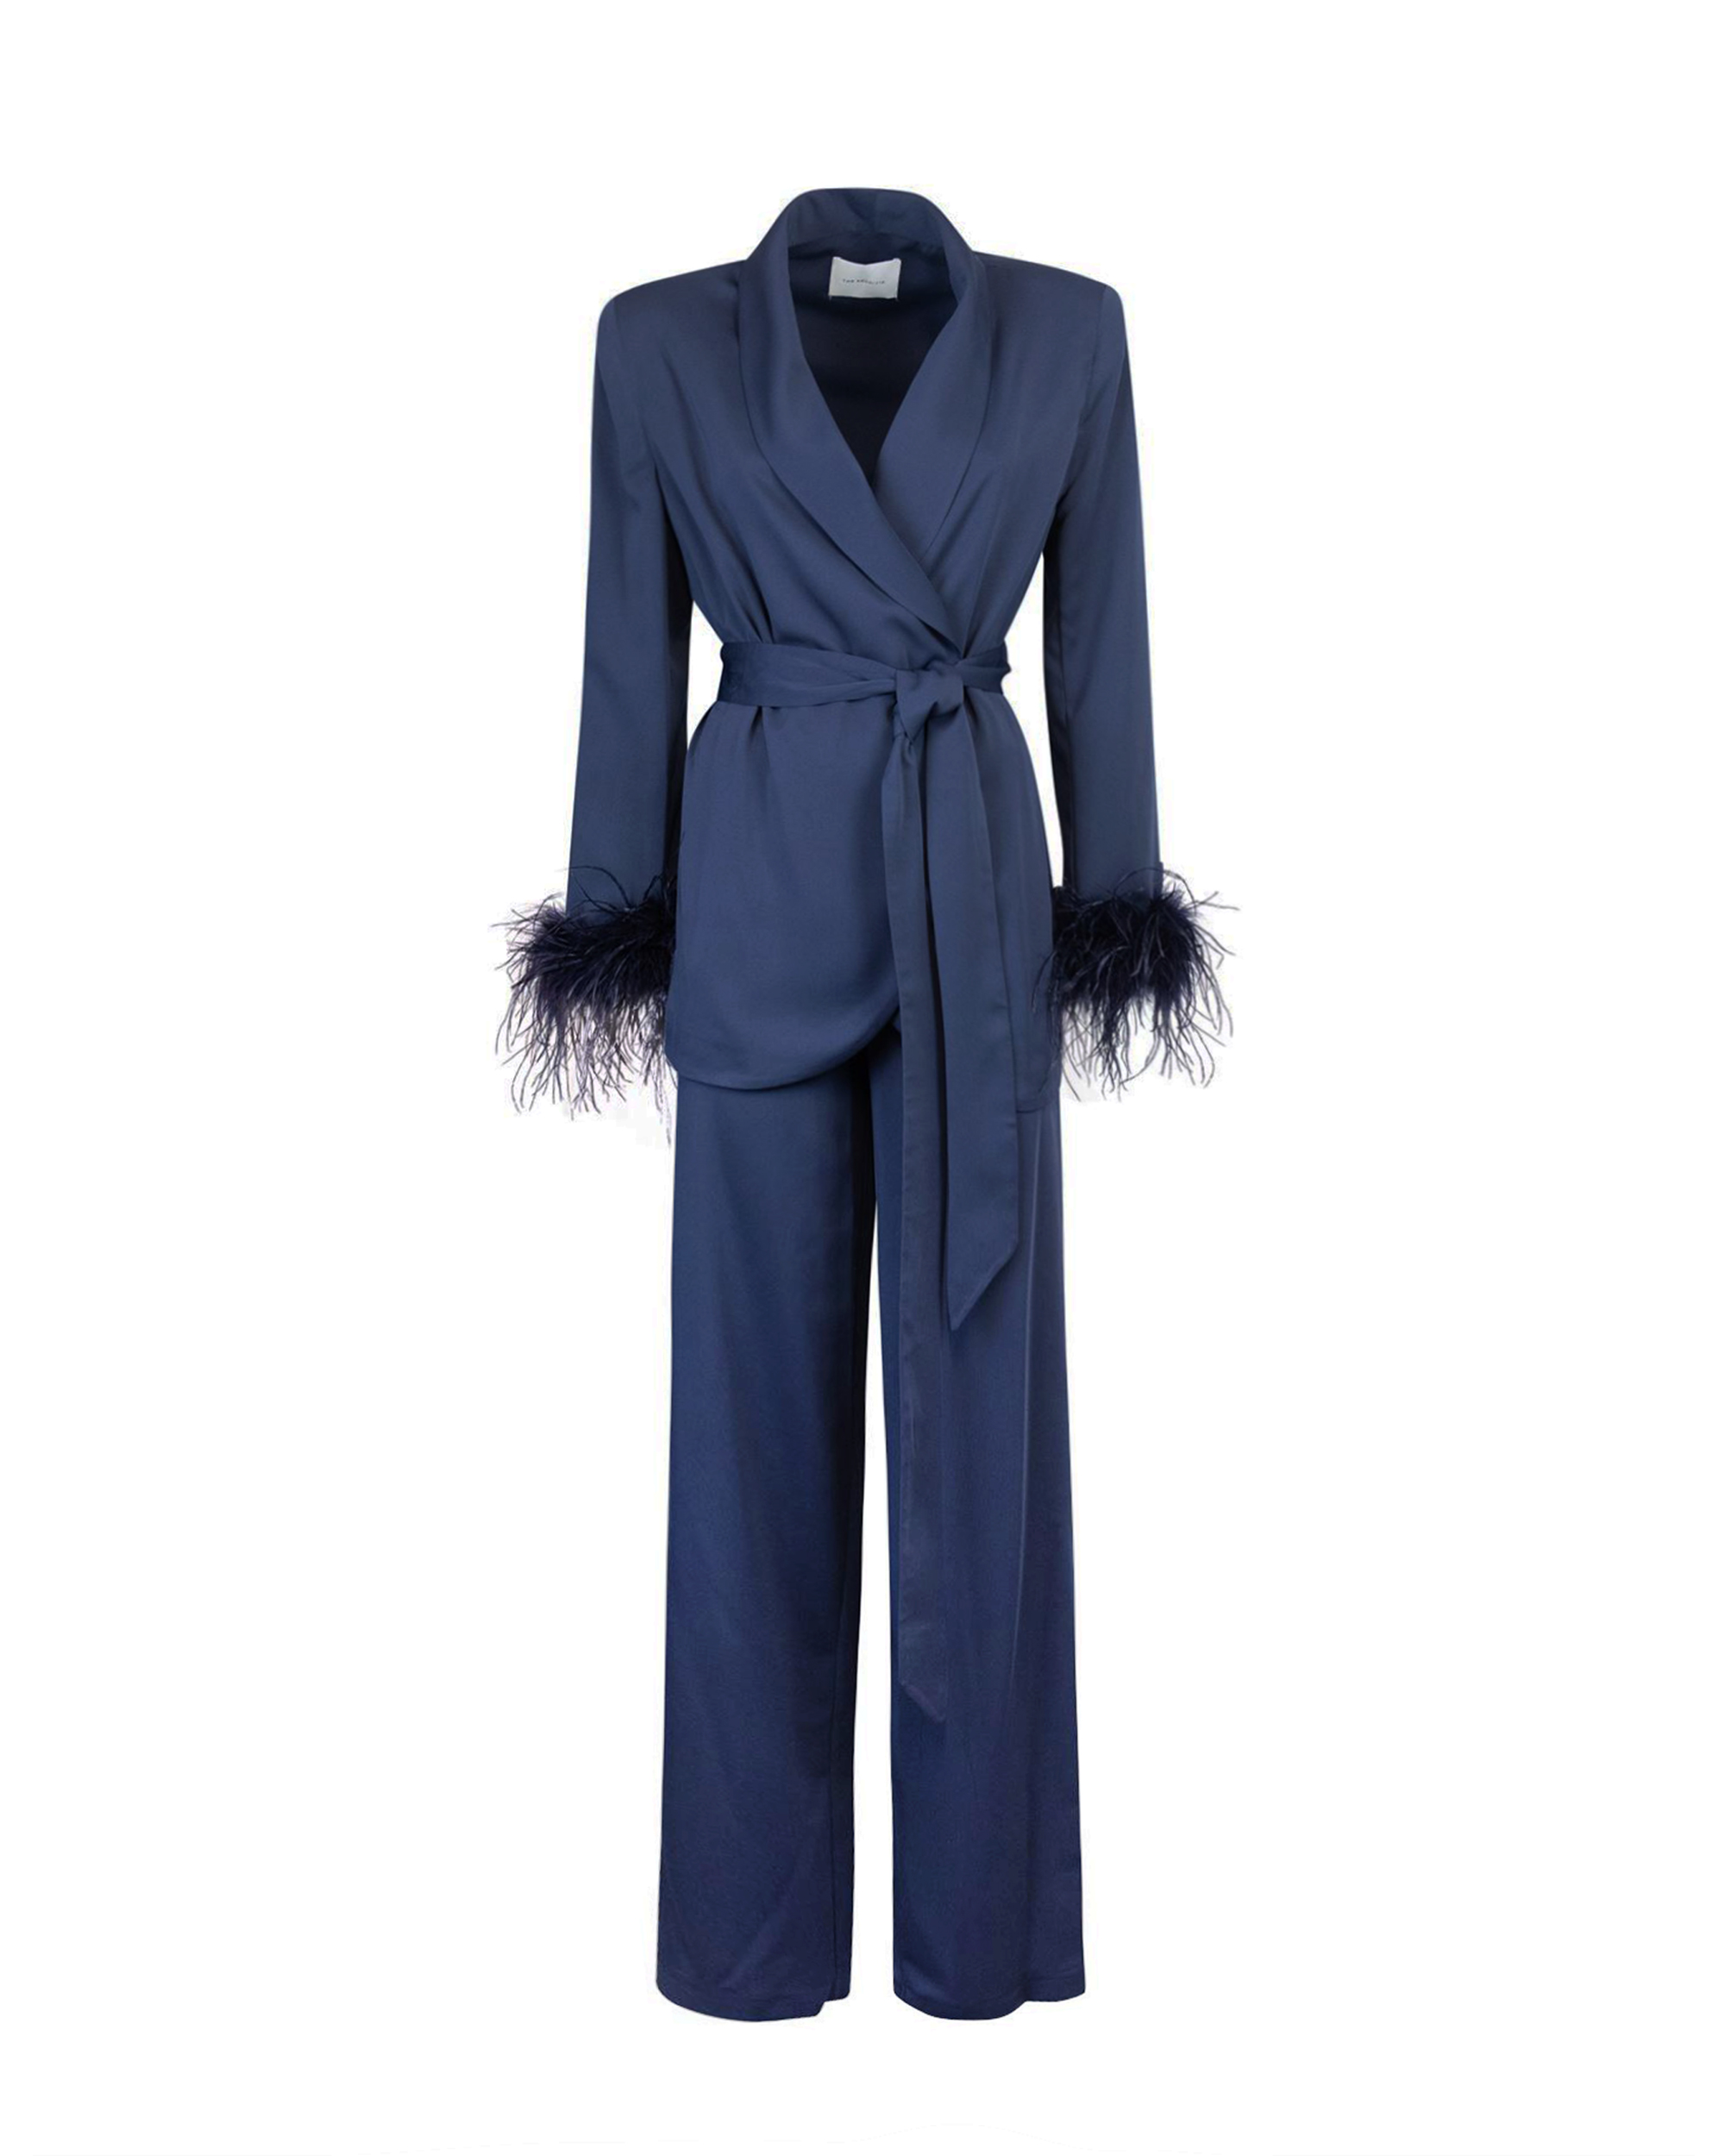 Shop The Archivia Tailor Ives Con Piume In Blue